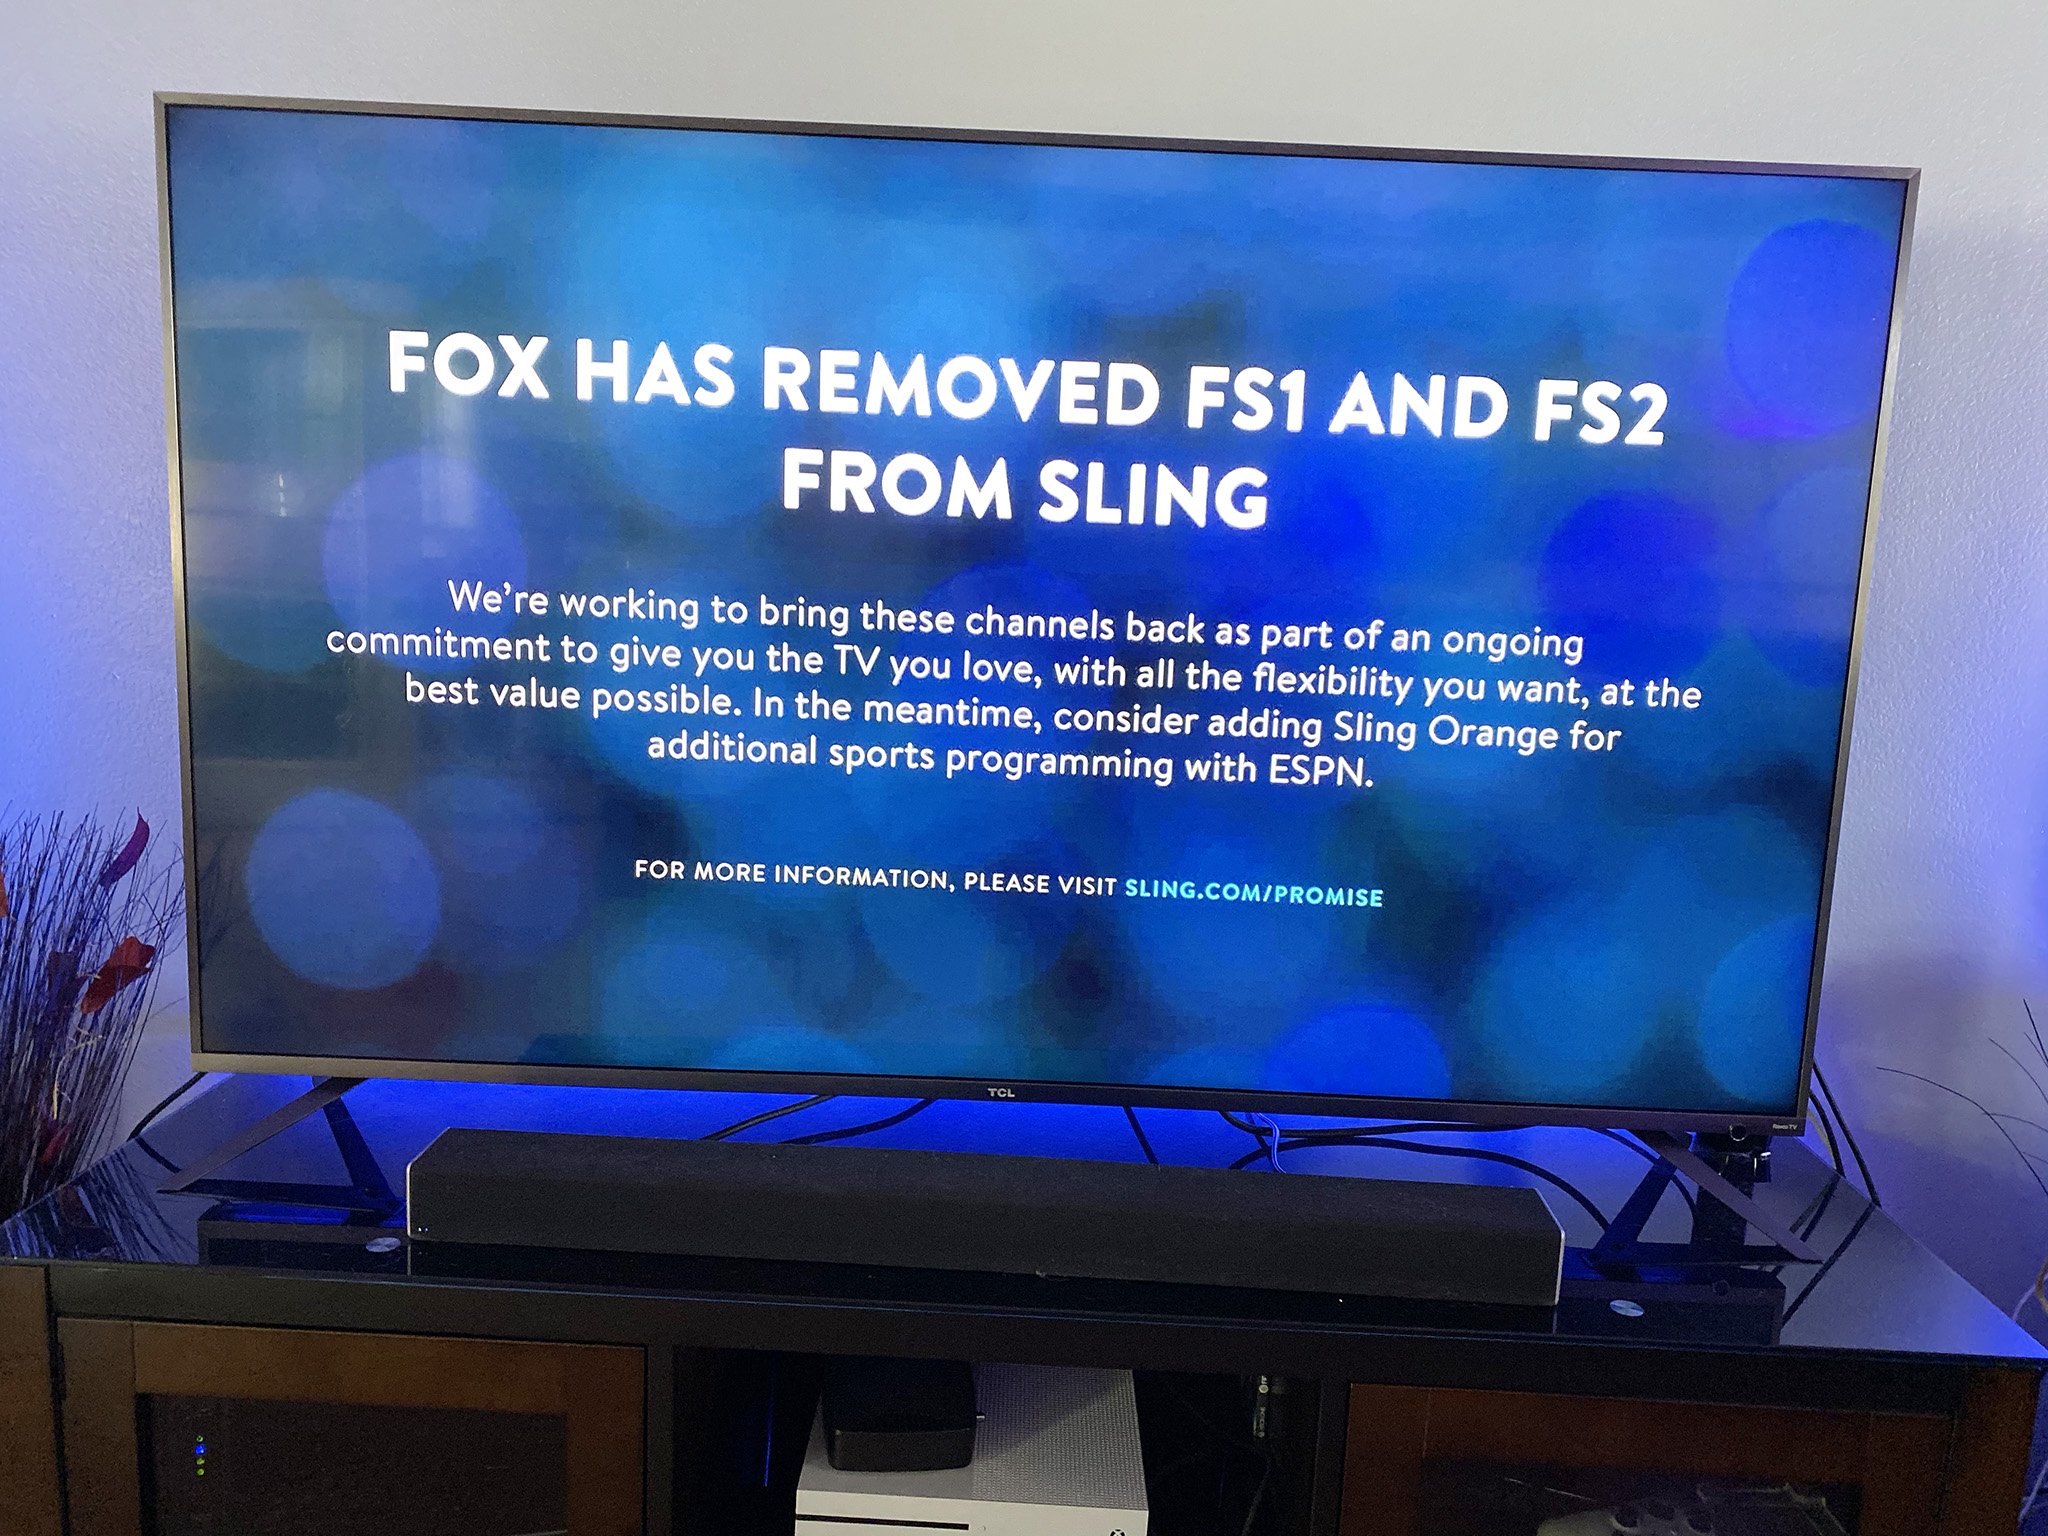 Now Fox And Dish Are Fighting With Channels Pulled From Sling Tv What To Watch